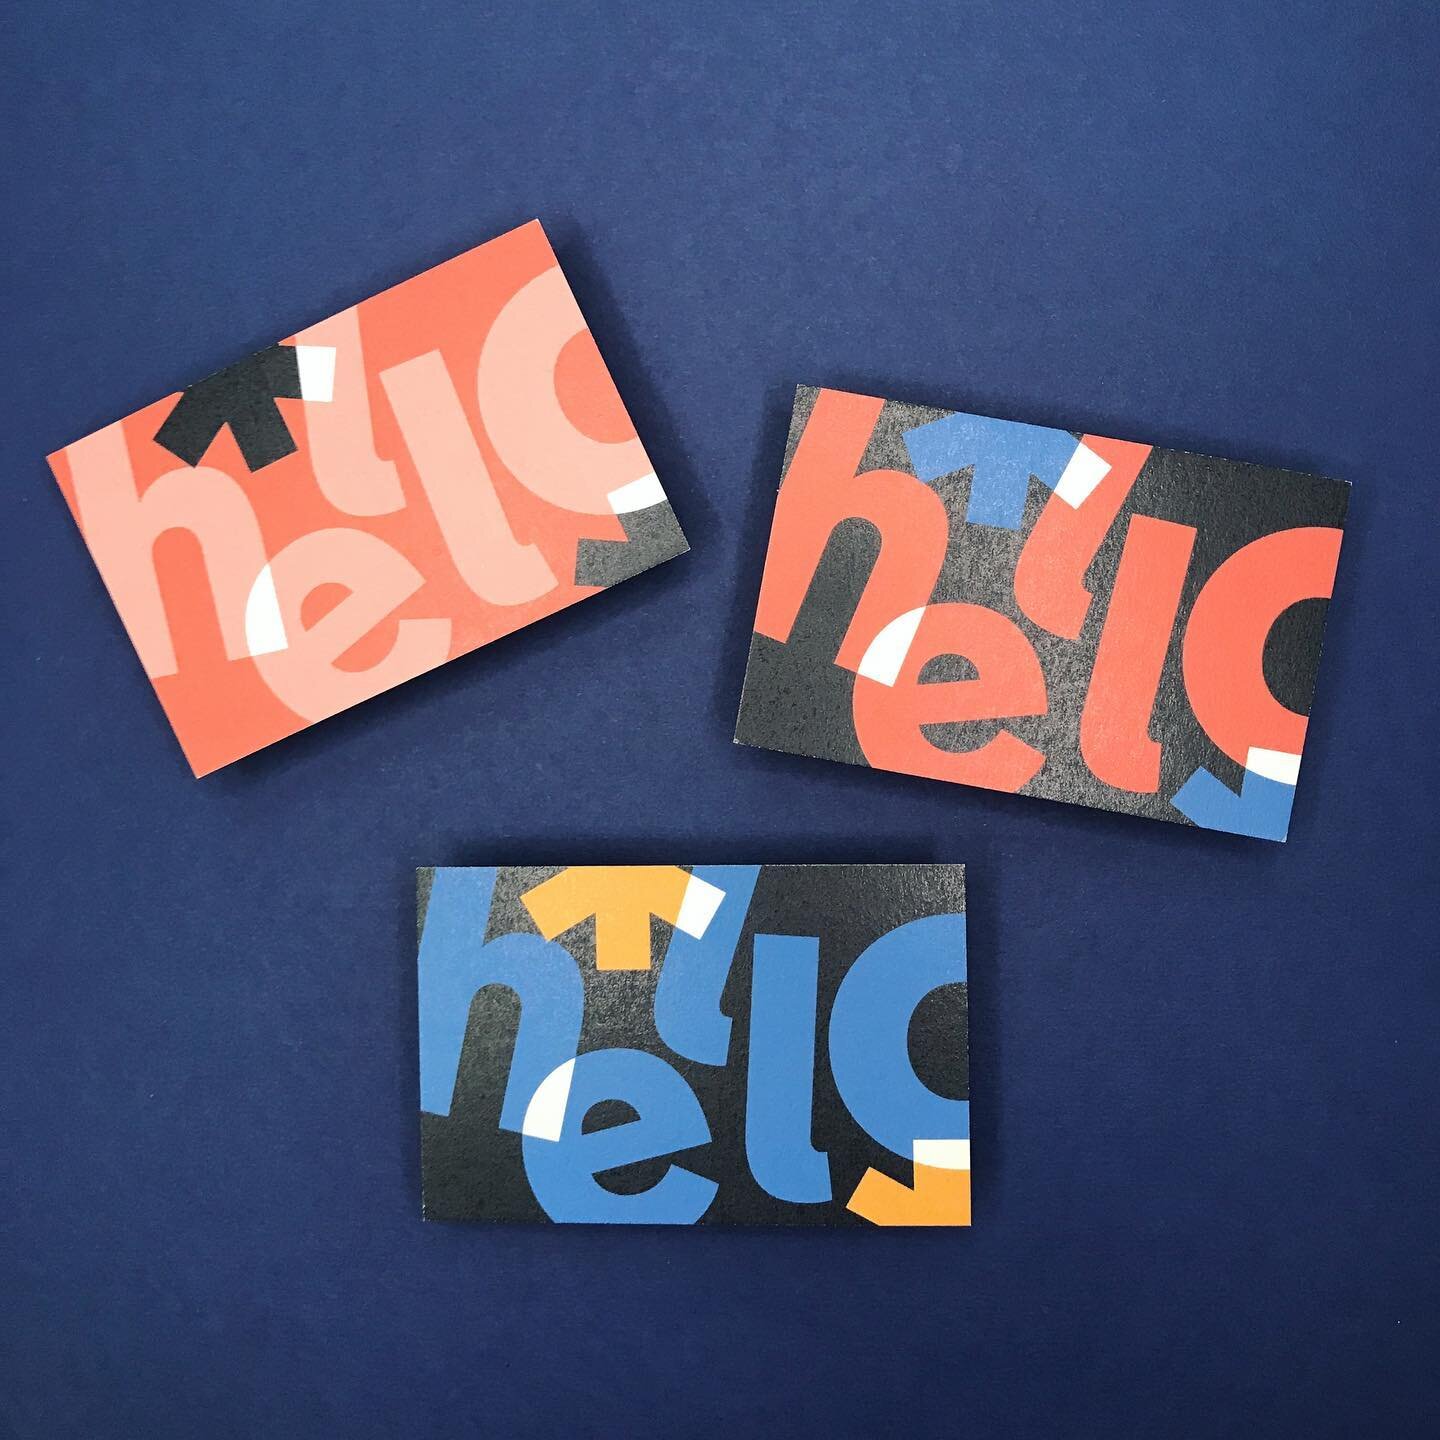 Hello! Fresh business cards designed for ourselves and nicely printed by @wetink_design. 

Friendly, chunky typography. 

#businesscards #graphicdesign #typography #stationerydesign #businesscarddesign #hello #digitalprinting #nicepaper #papersnapstu